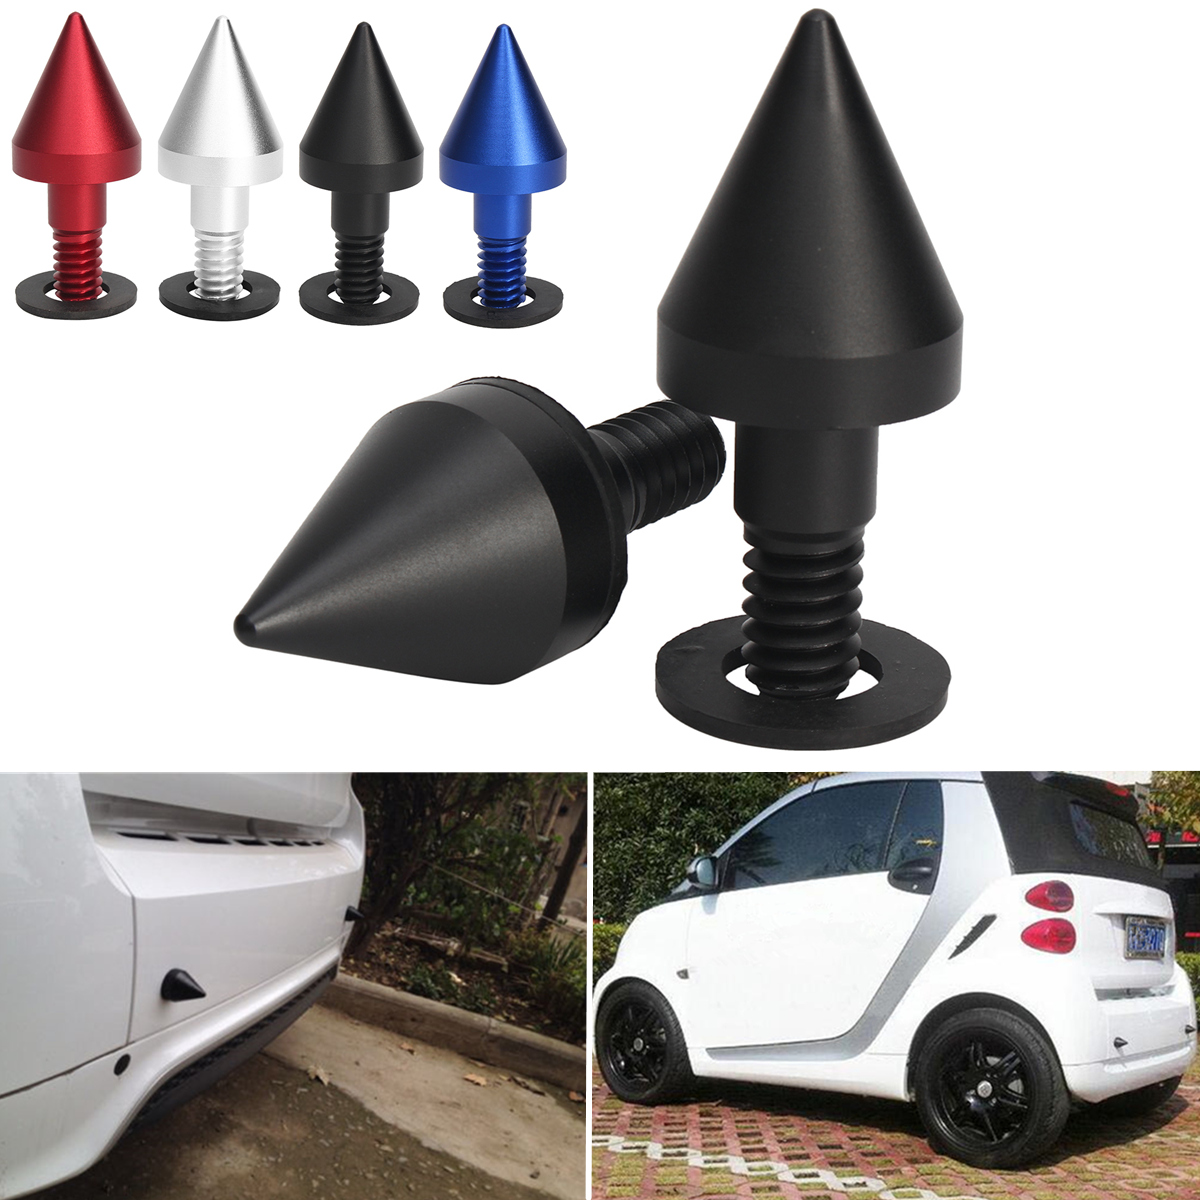 2 Black Front or Rear Bumper Protector Spikes Guards Protectors For Smart Car